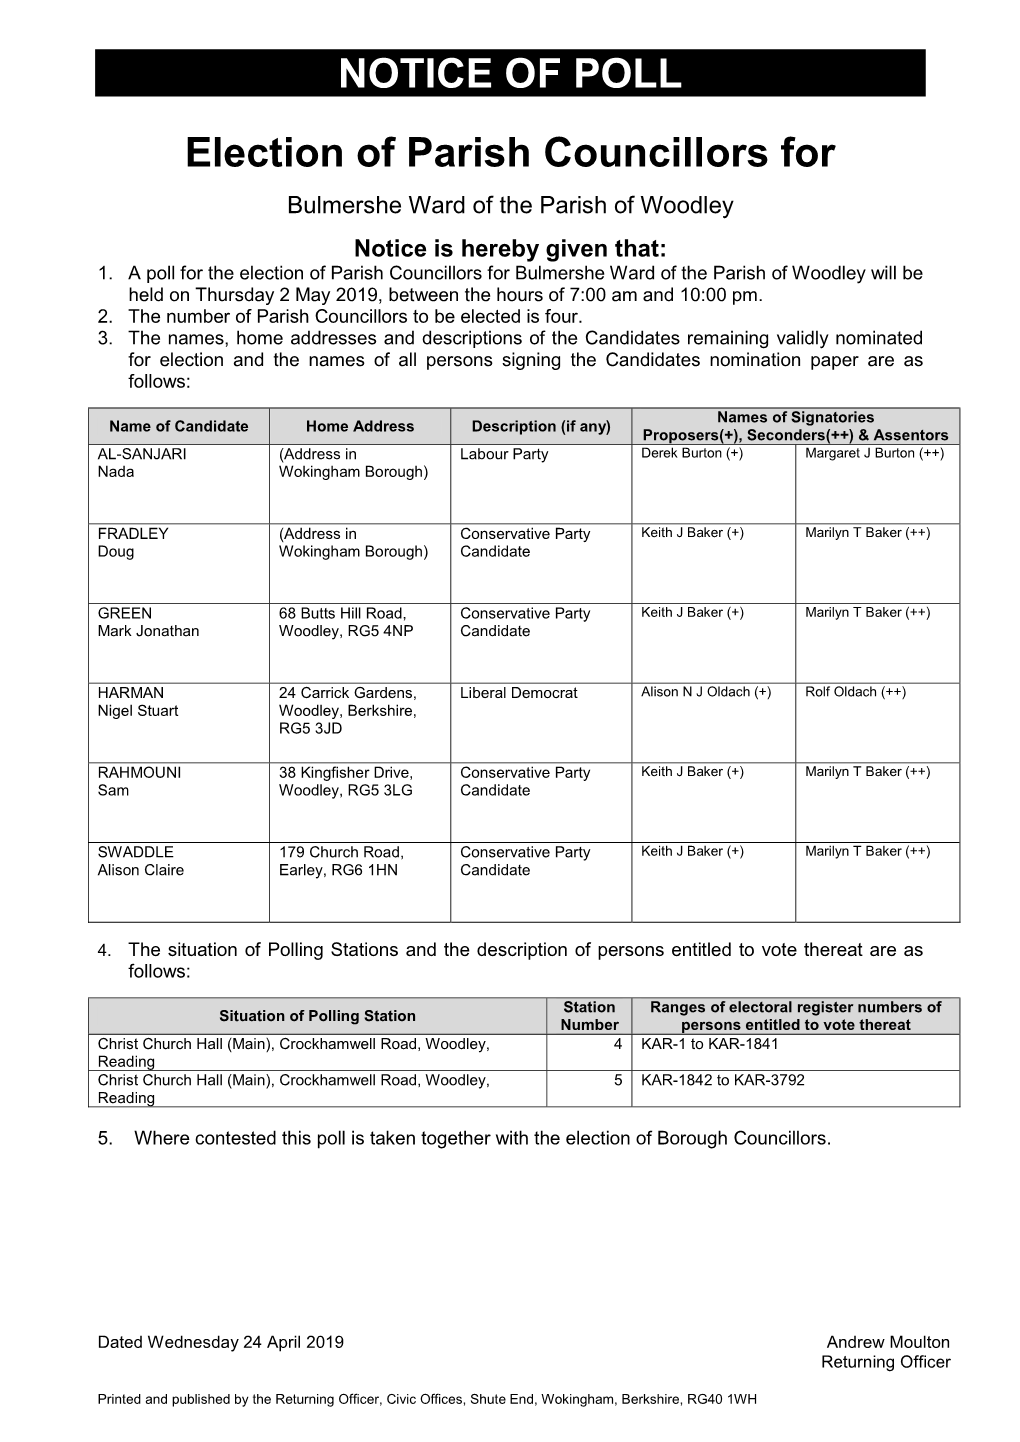 NOTICE of POLL Election of Parish Councillors